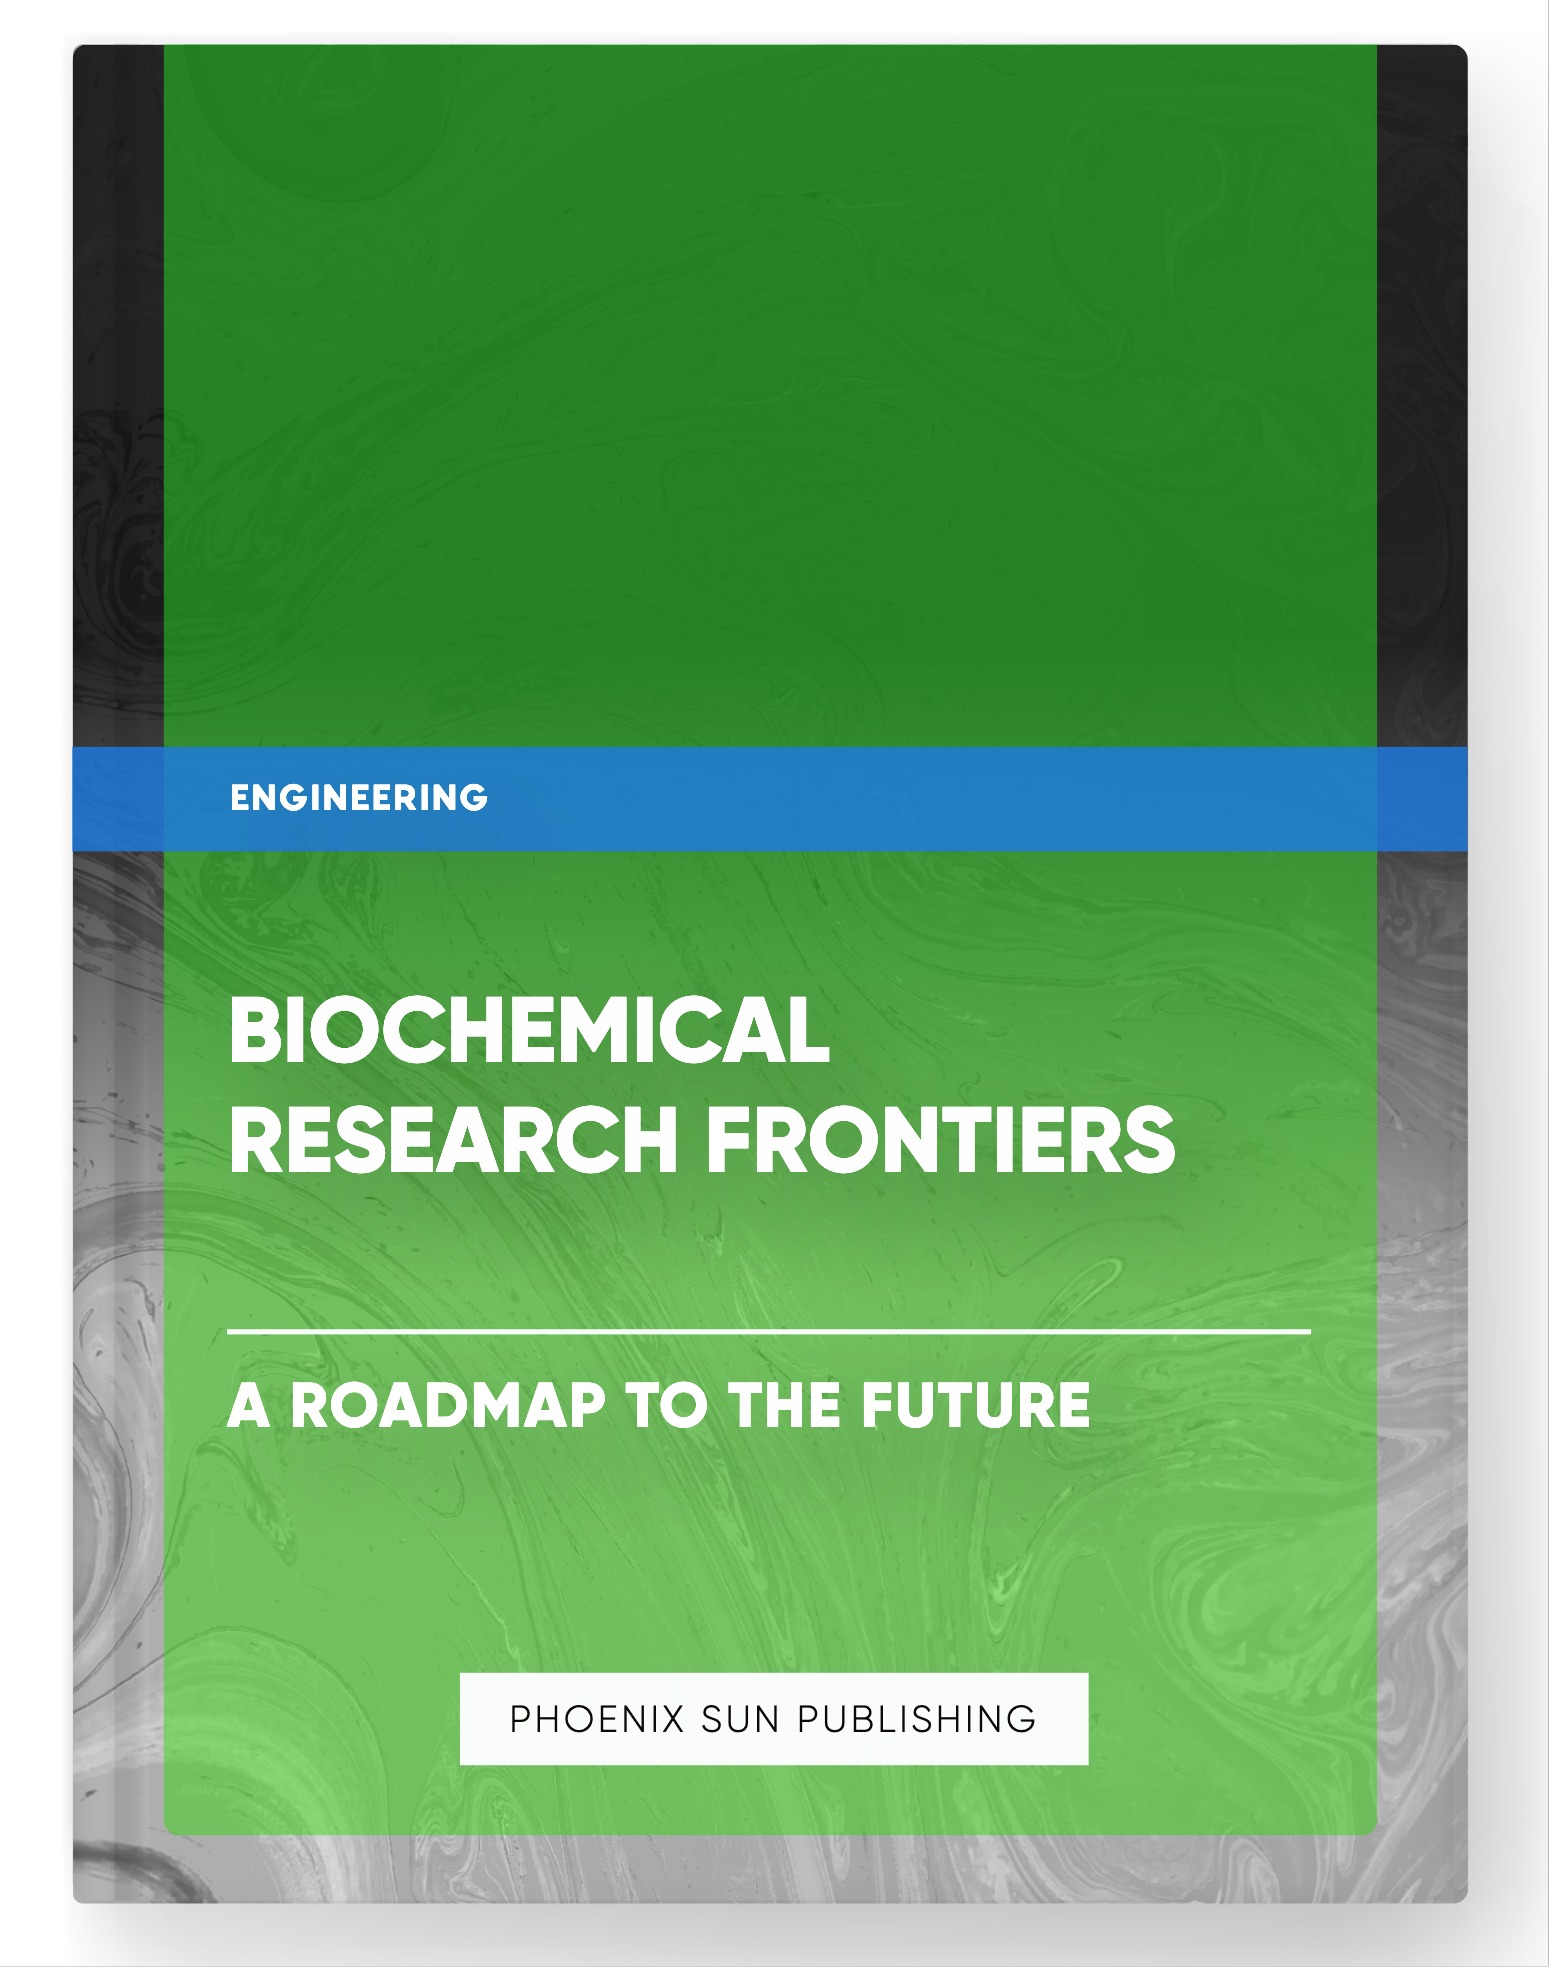 Biochemical Research Frontiers – A Roadmap to the Future